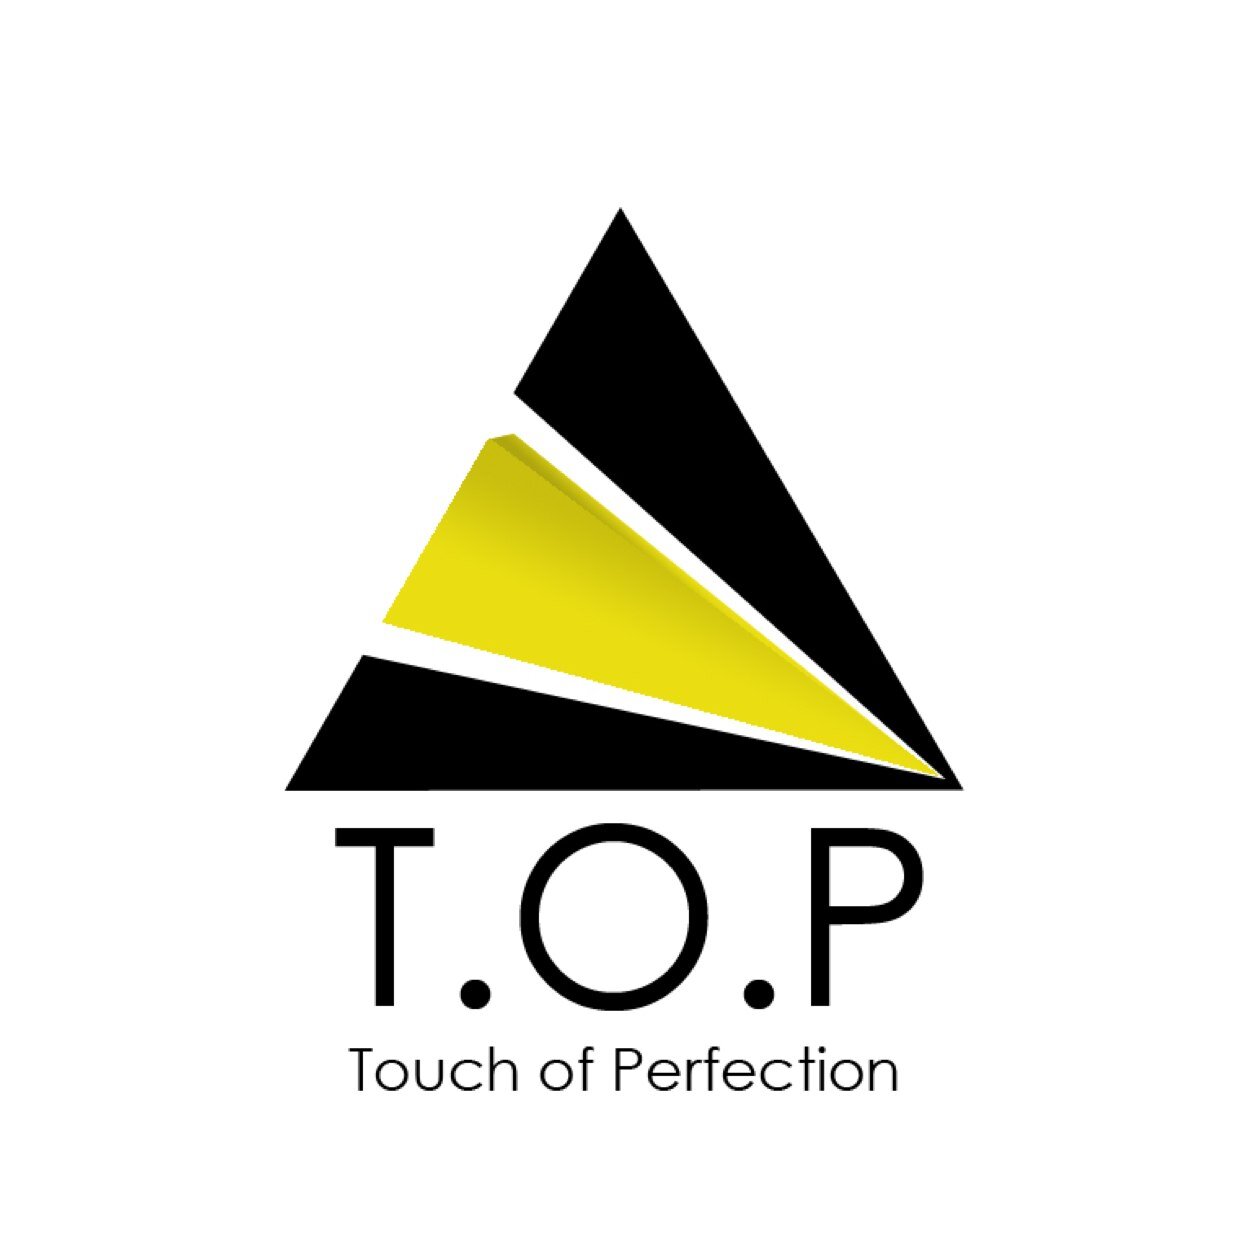 We are T.O.P (Touch Of Perfection) Event Organizer. Jazz Cross Over, 9 Mei 2014 di Jazzcorner Cafe. FREE! More info contact : 082139391981.